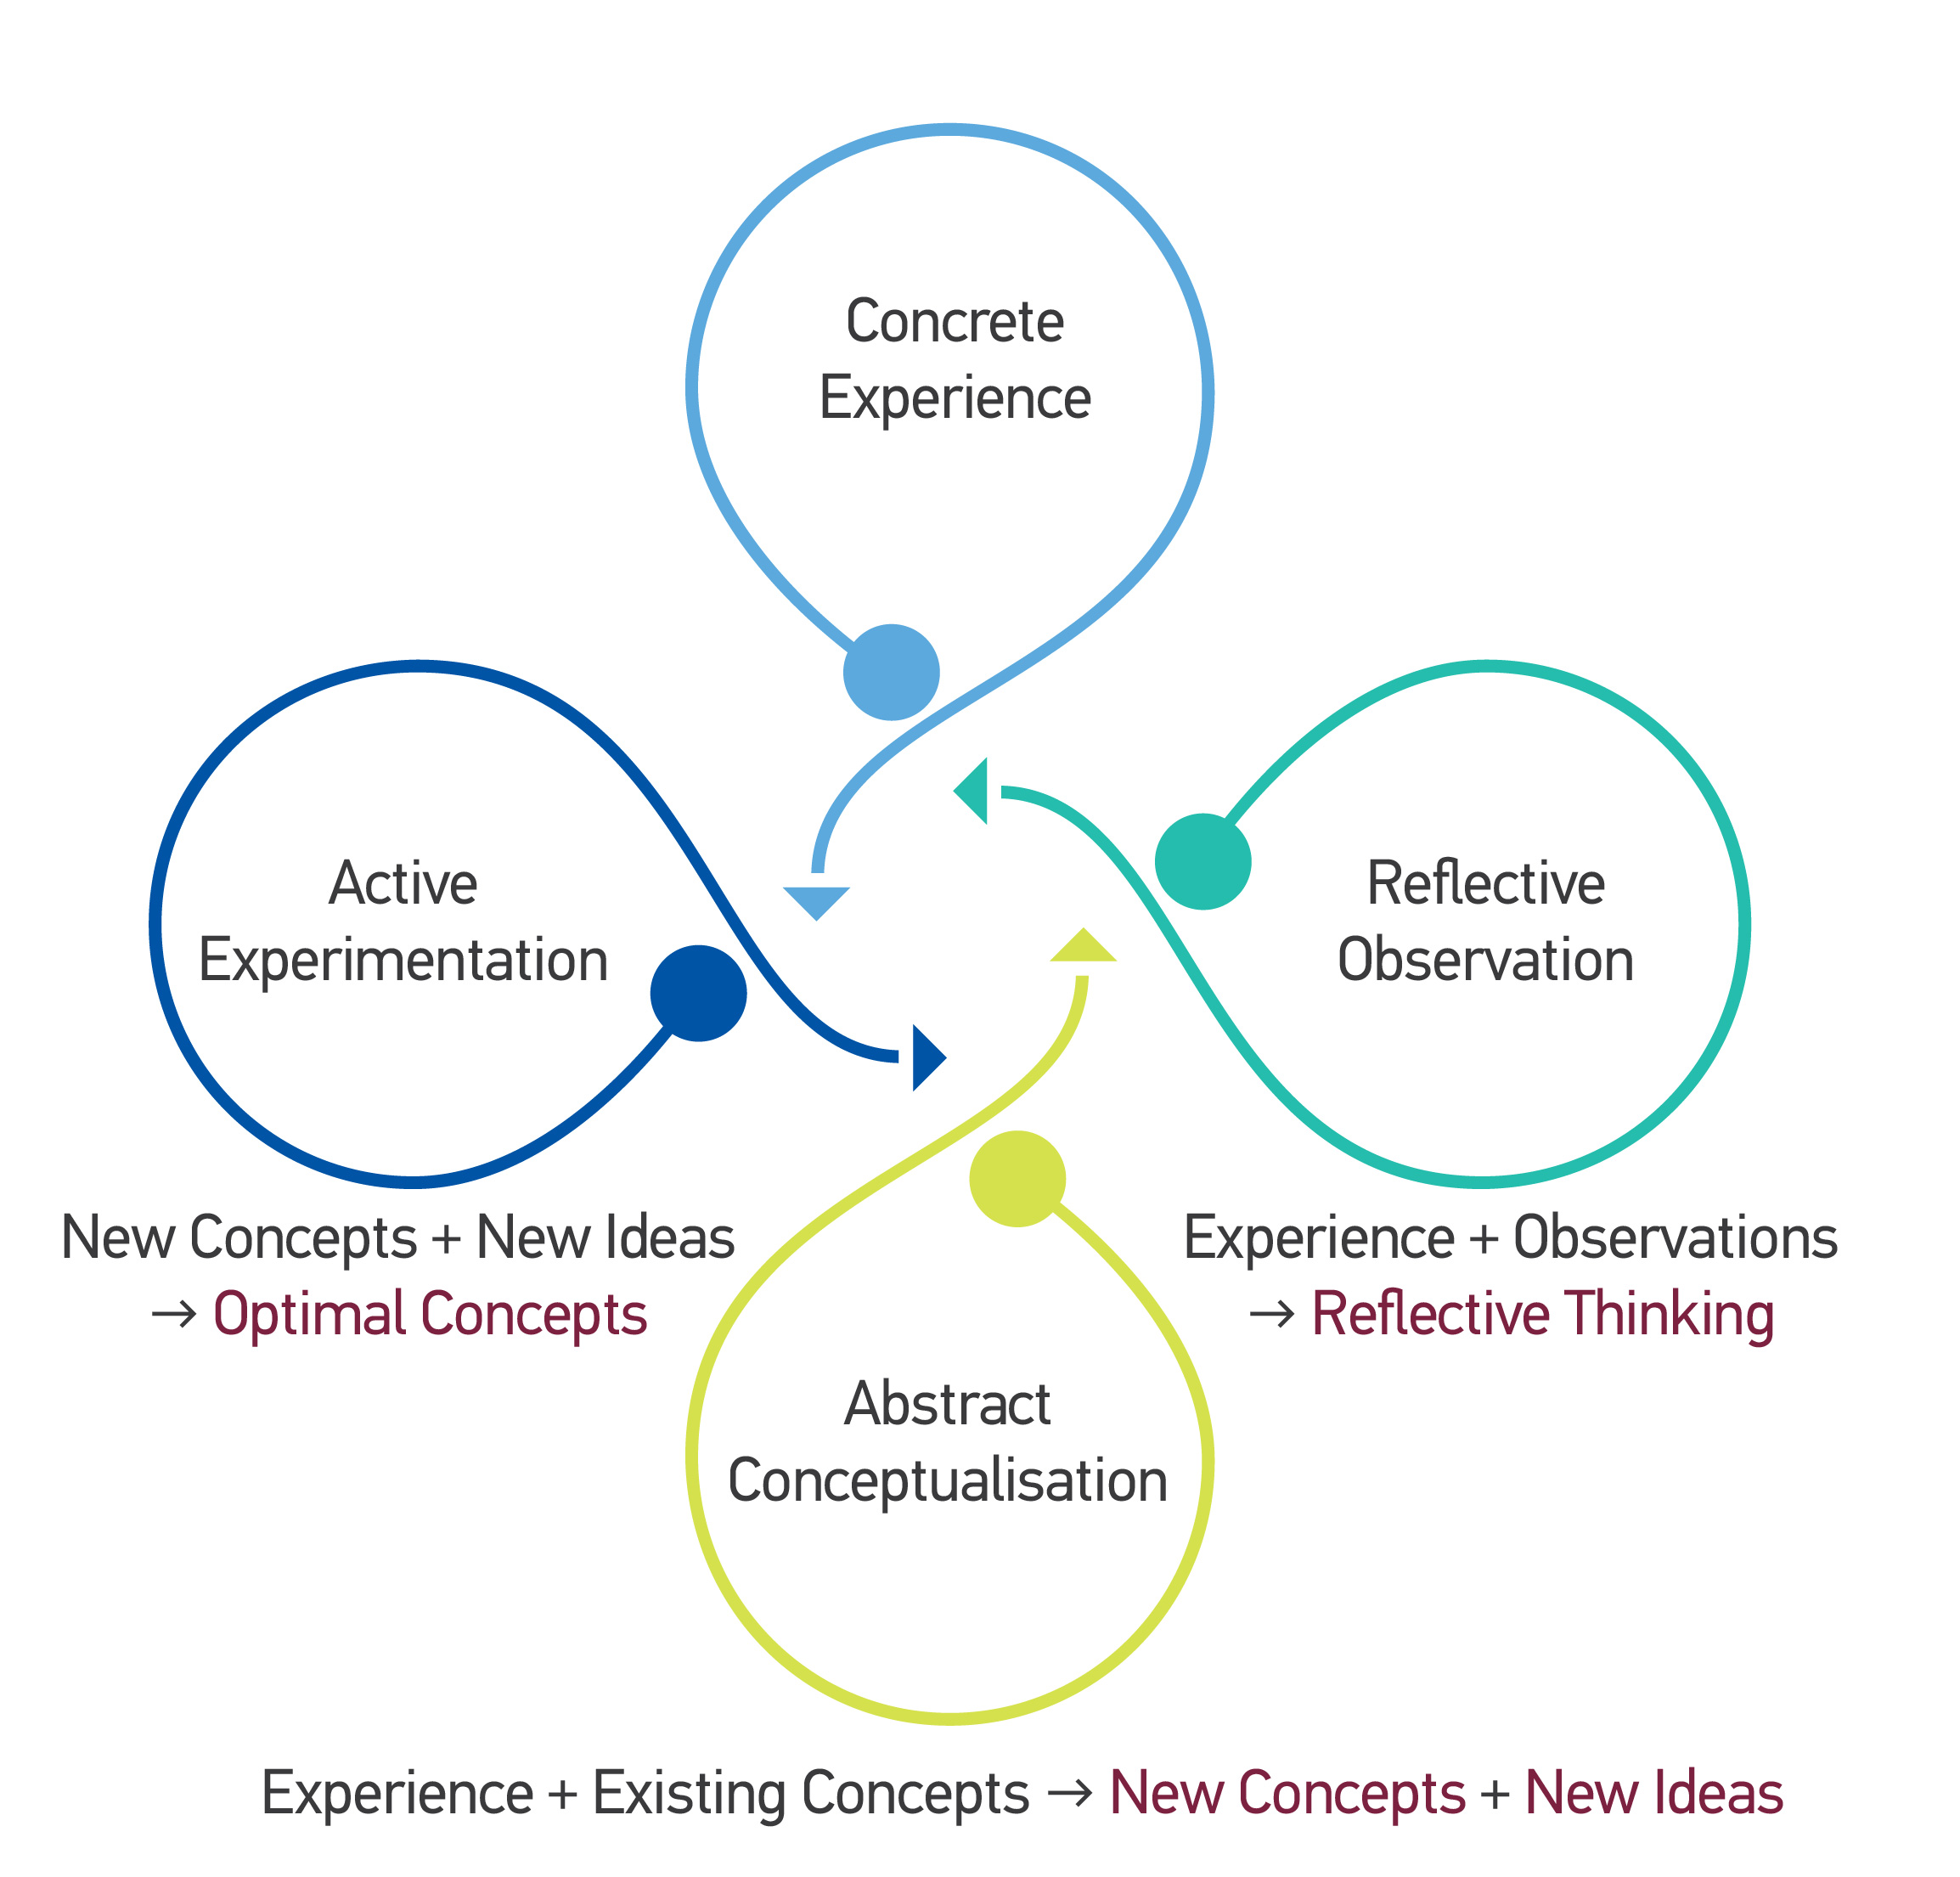 Kolb's cycle of experiential learning